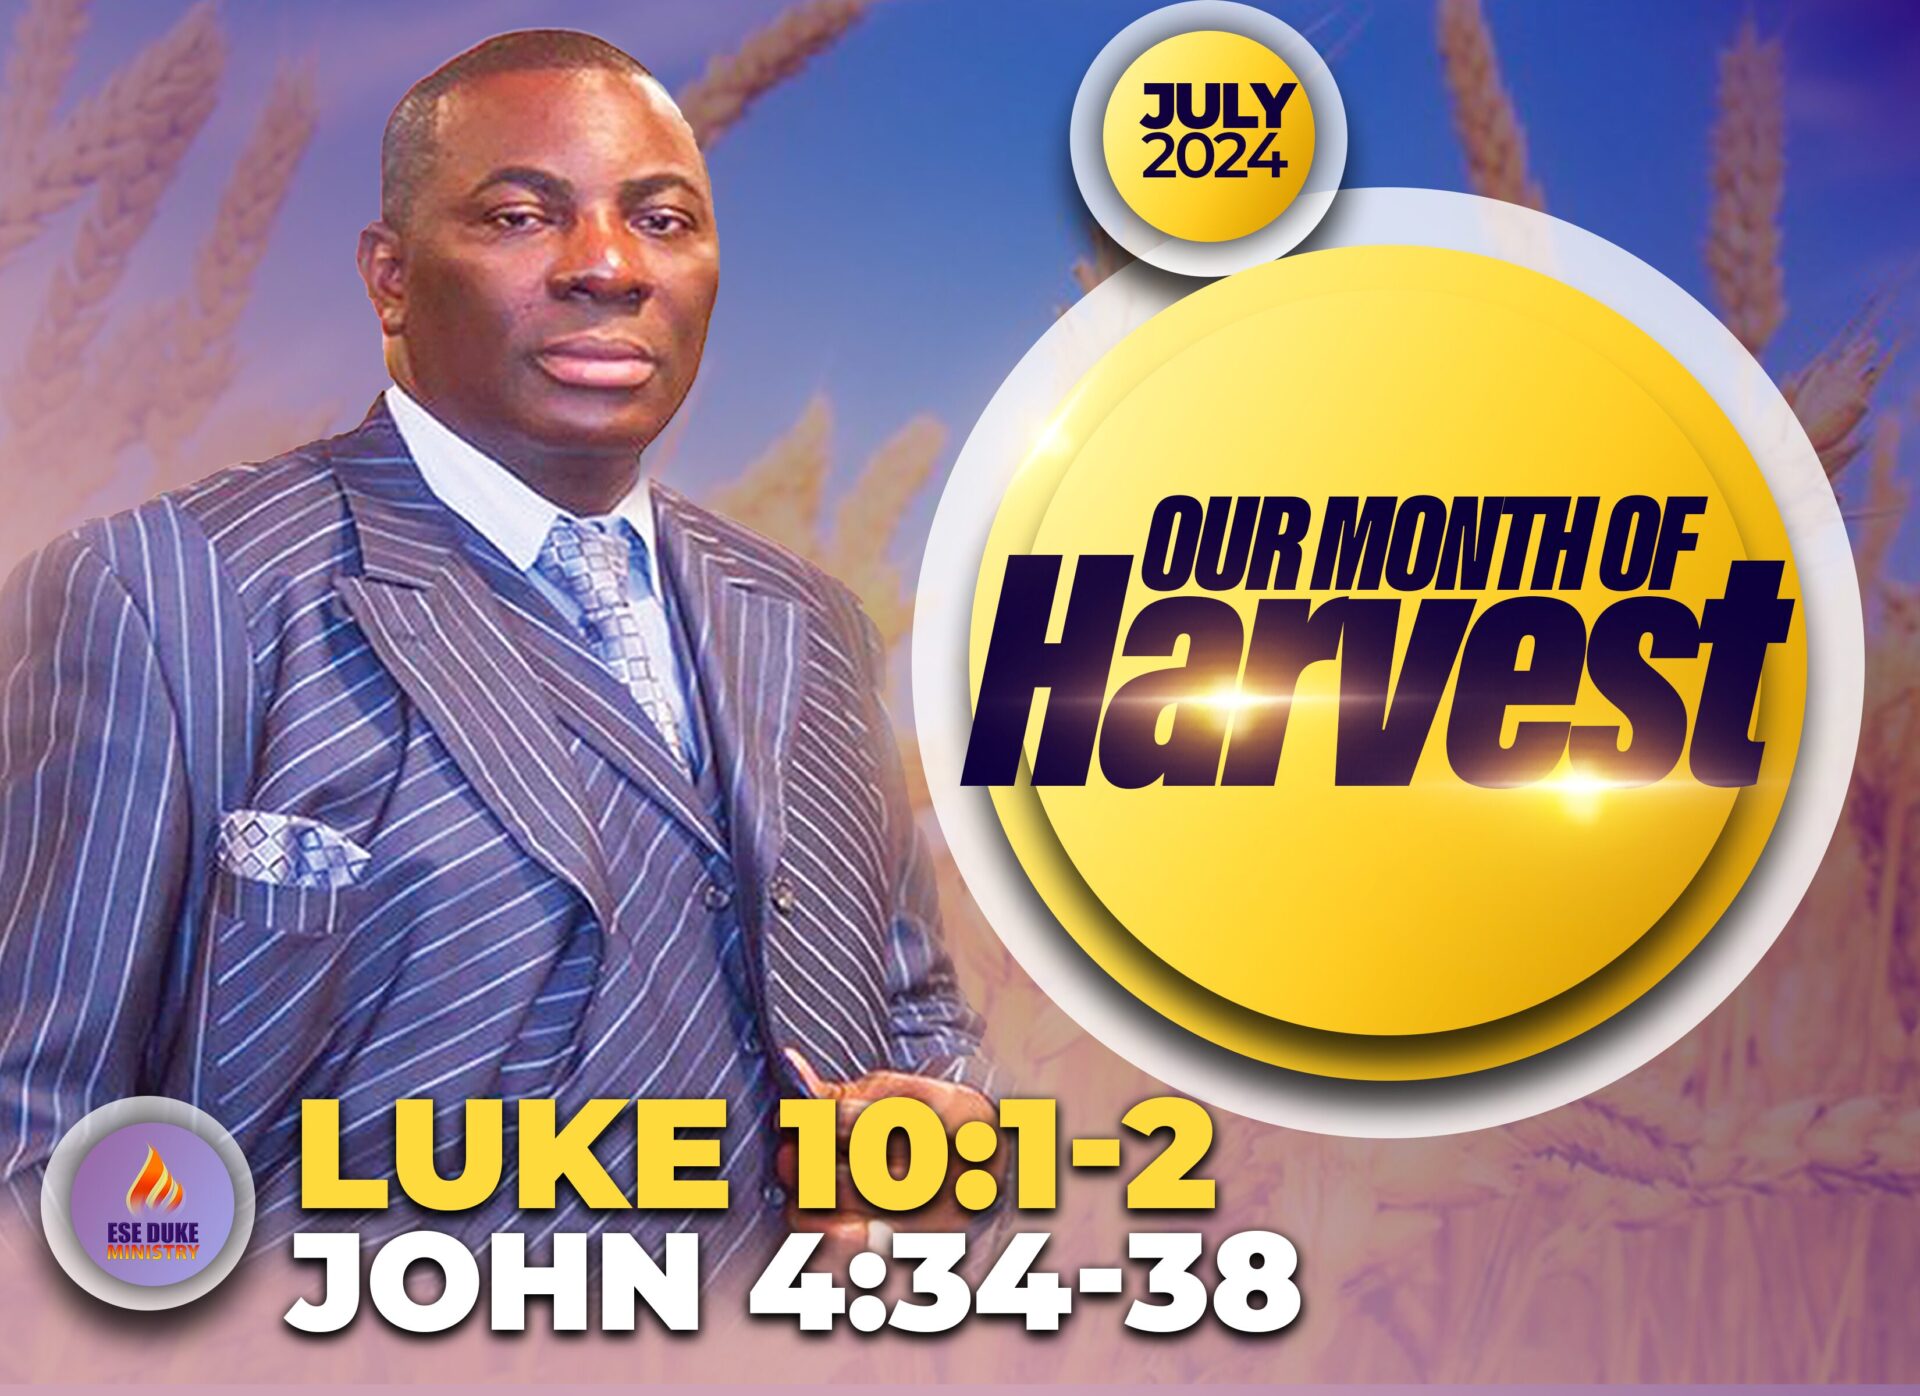 EDM Monthly Prophetic Positioning_Declaratin of the month_OUR MONTH OF HARVEST july 2024